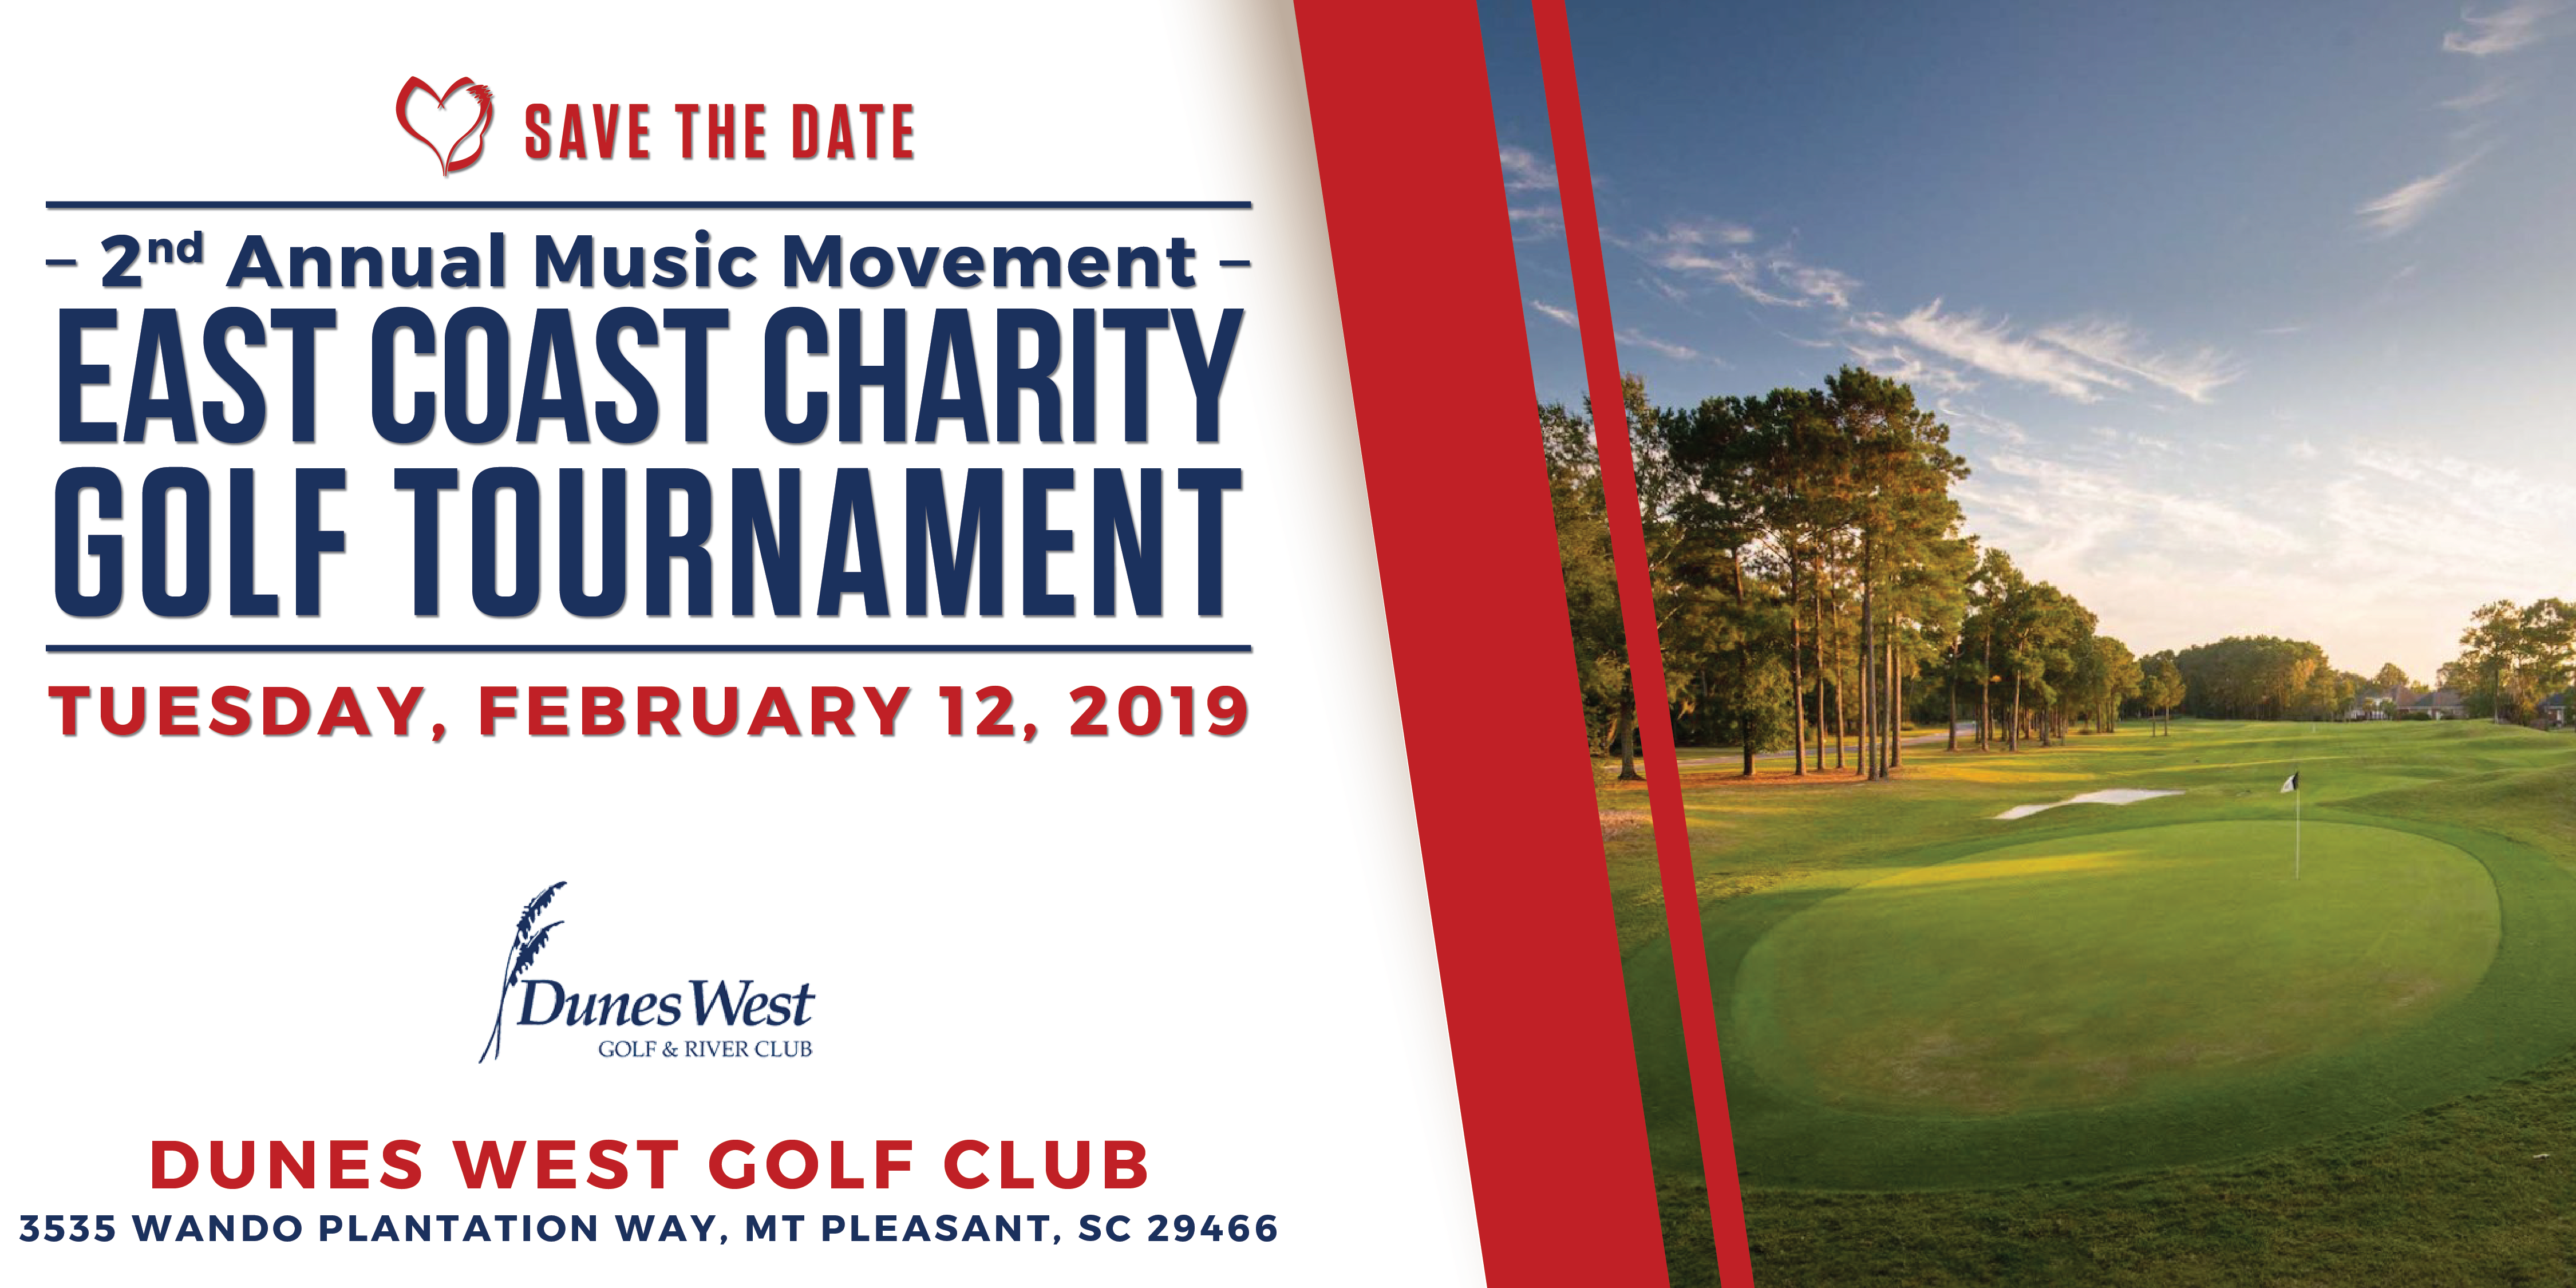 2nd Annual Music Movement East Coast Charity Golf Tournament